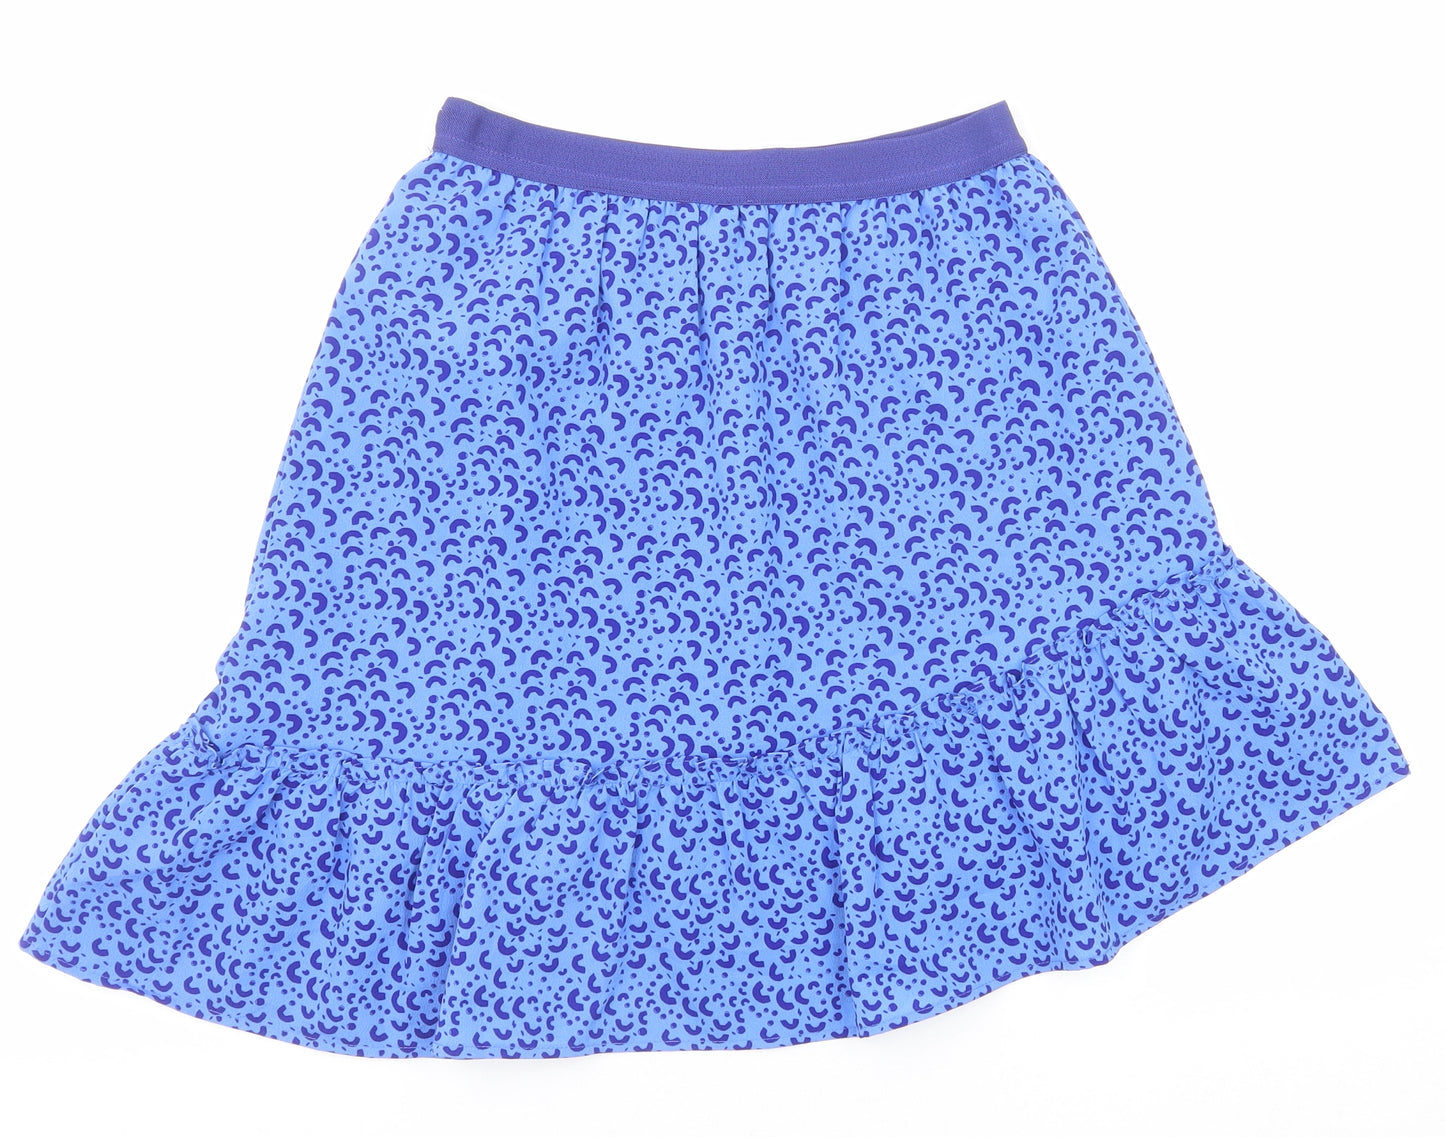 Marks and Spencer Girls Blue Geometric Polyester A-Line Skirt Size 12-13 Years Regular Pull On